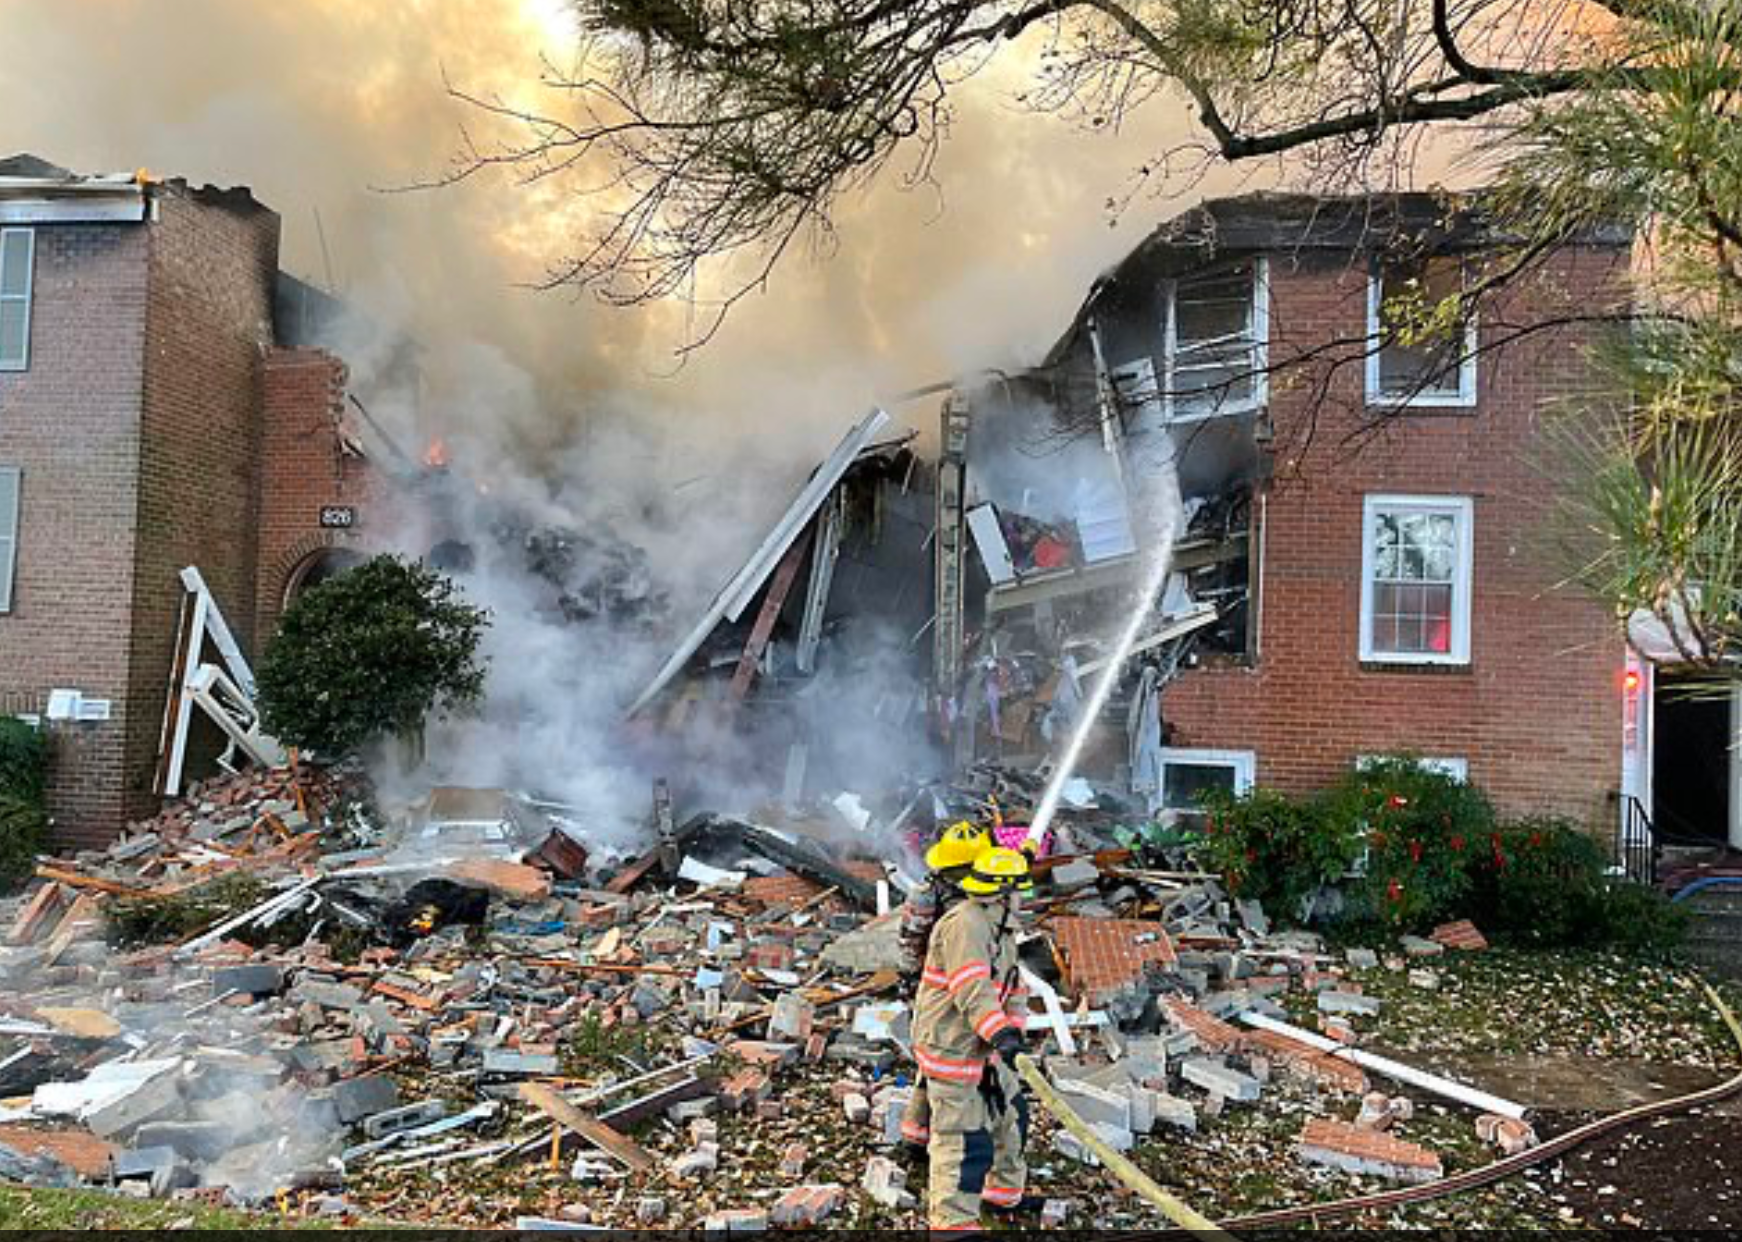 A building in Gaithersburg, Maryland, collapsed after a 'catastrophic’ explosion